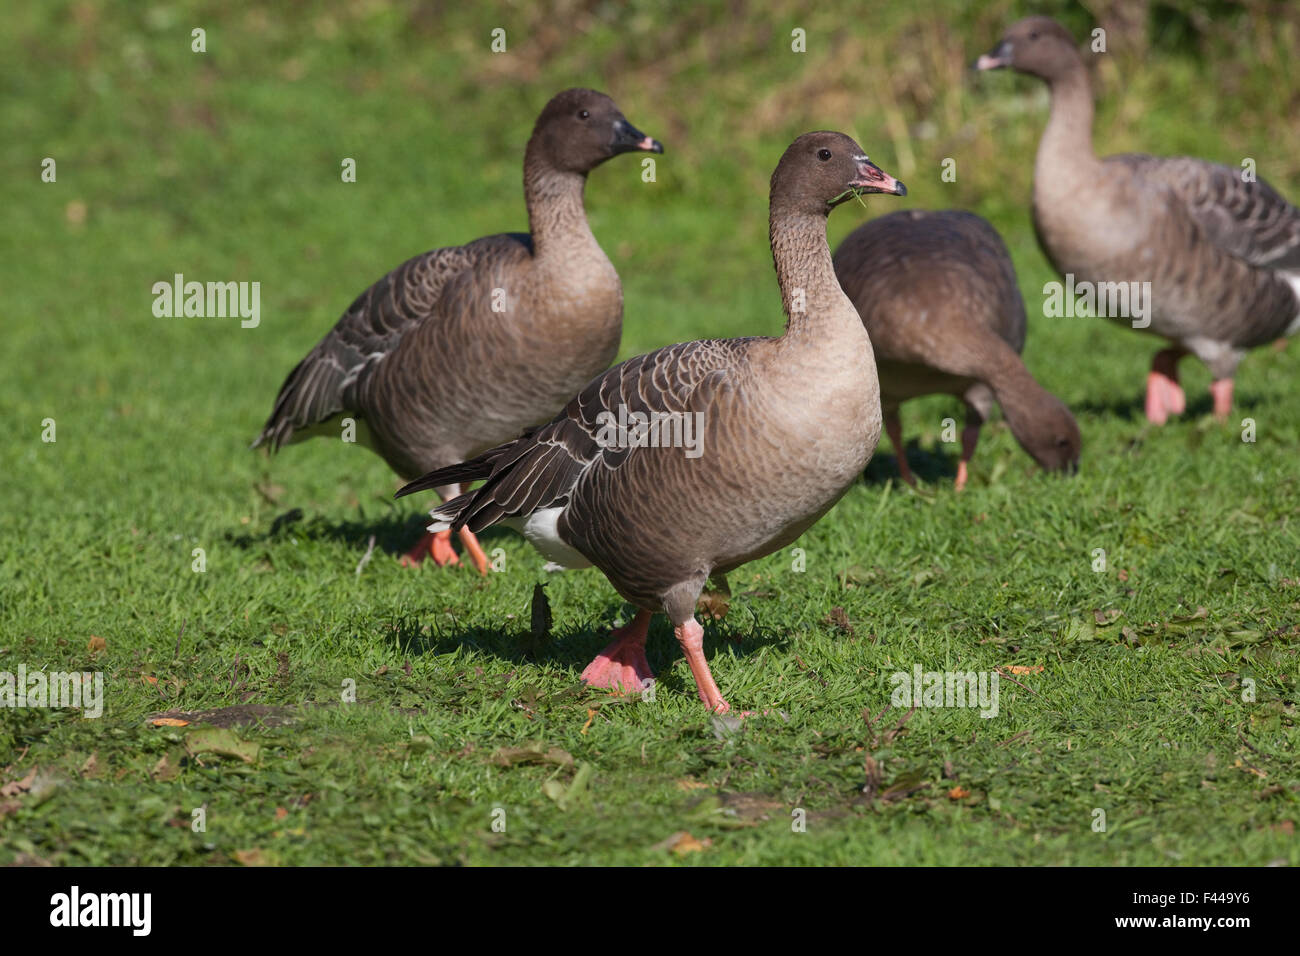 Pink-footed Geese (Anser brachyrhynchus). Centre front bird in juvenile, immature, or first winter plumage. Note bill colour. Stock Photo